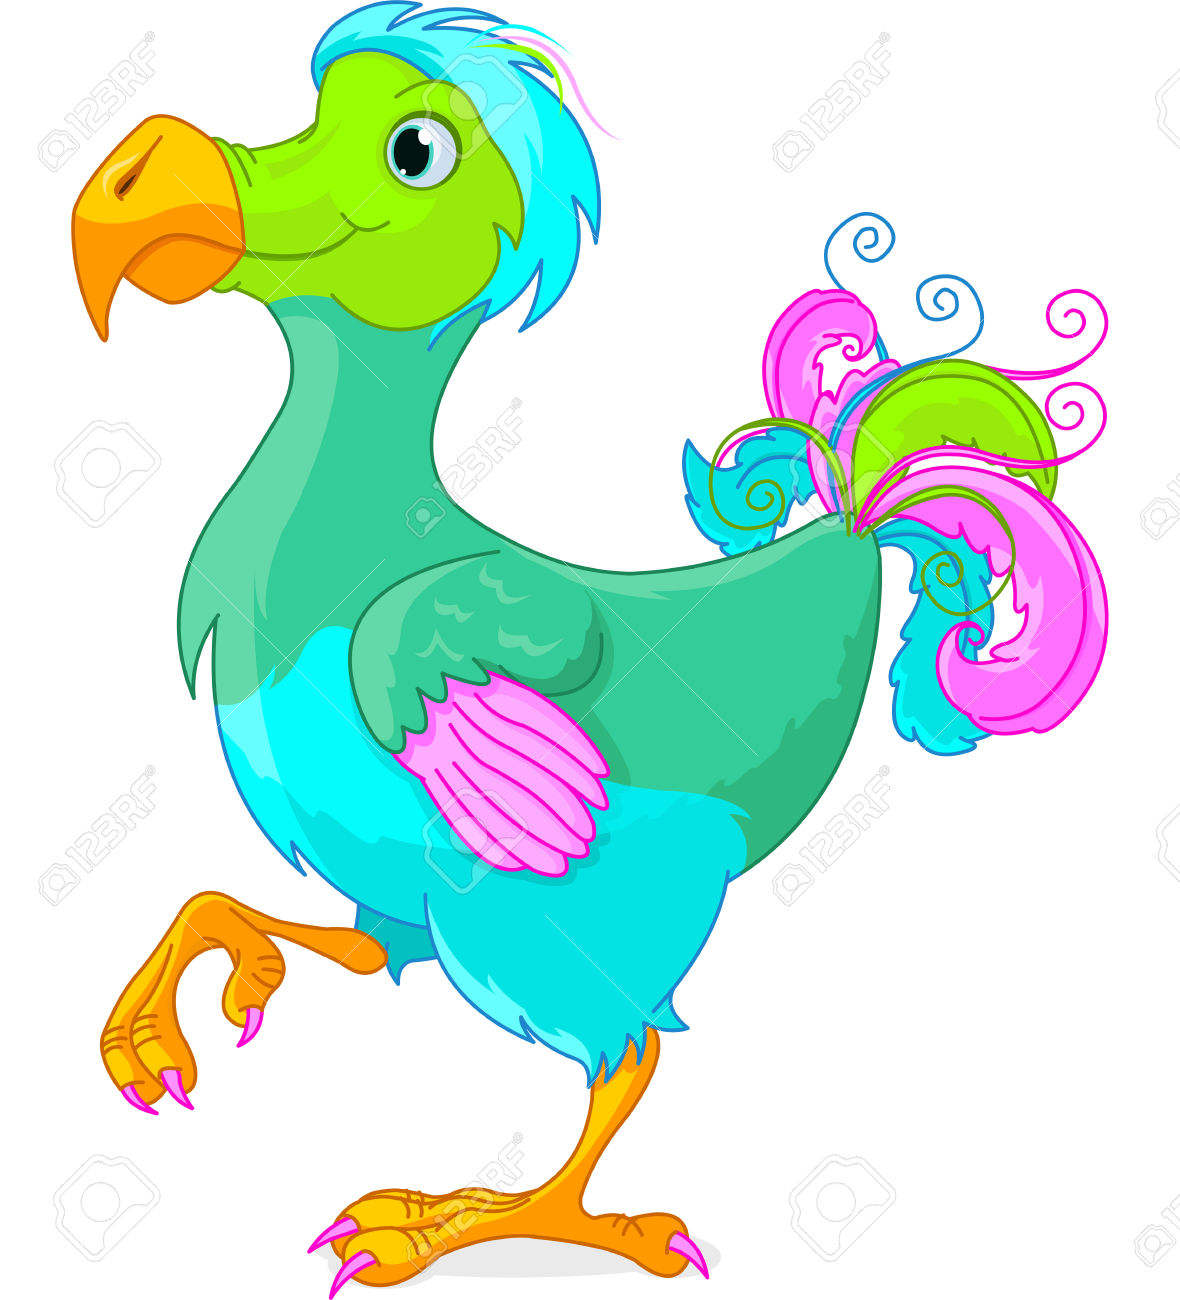 Dodo clipart #9, Download drawings